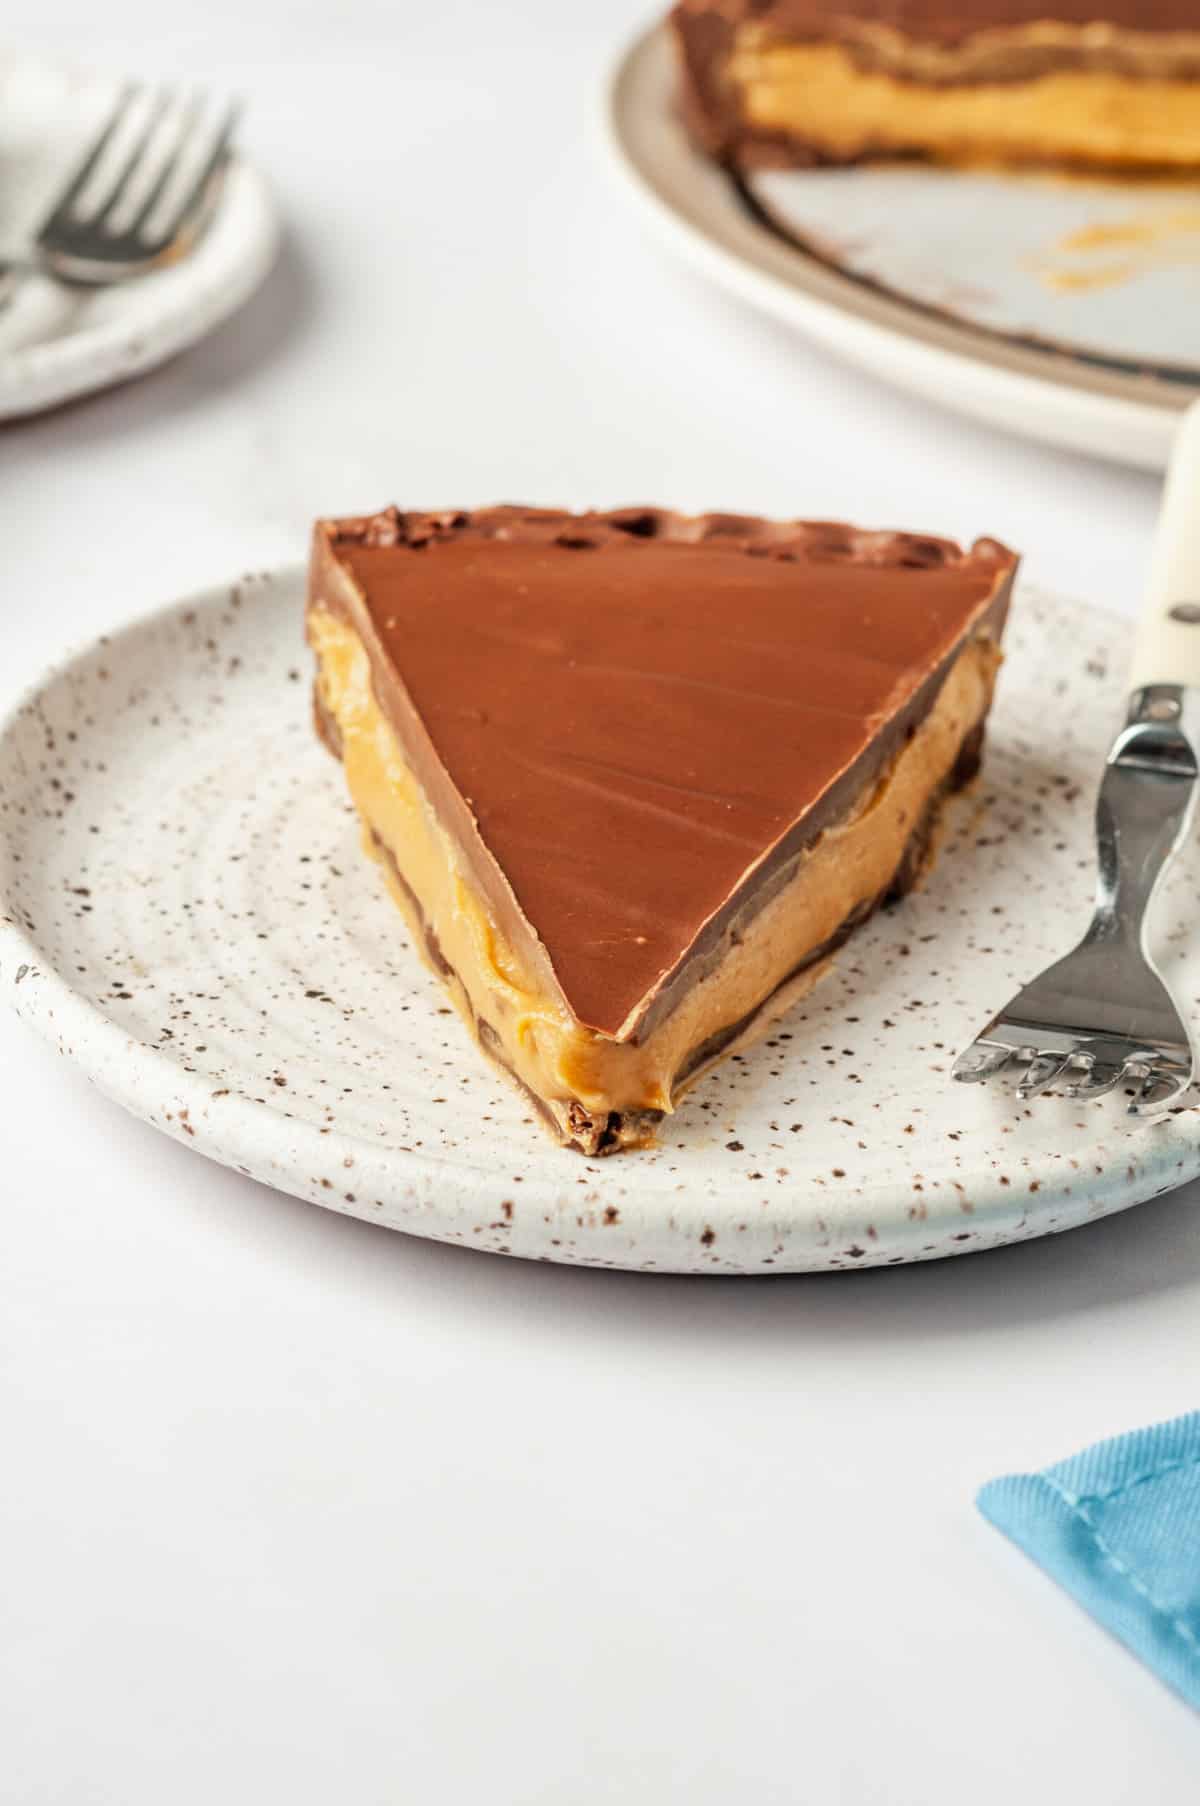 S close up image of a slice of Reese's peanut butter cup pie served on a brown speckled plate with a fork next to it.